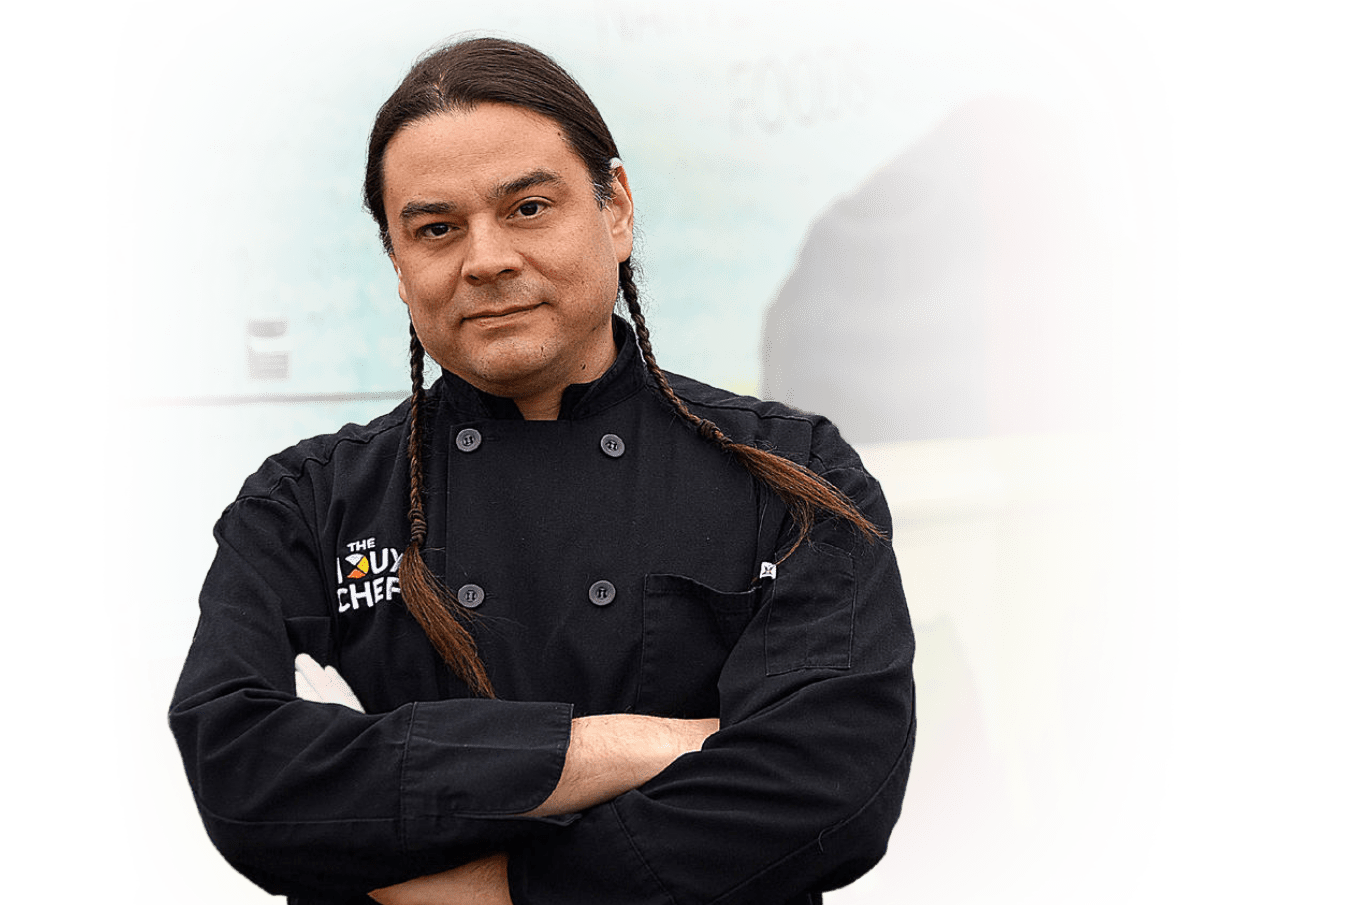 Native American man in chef coat with The Sioux Chef logo